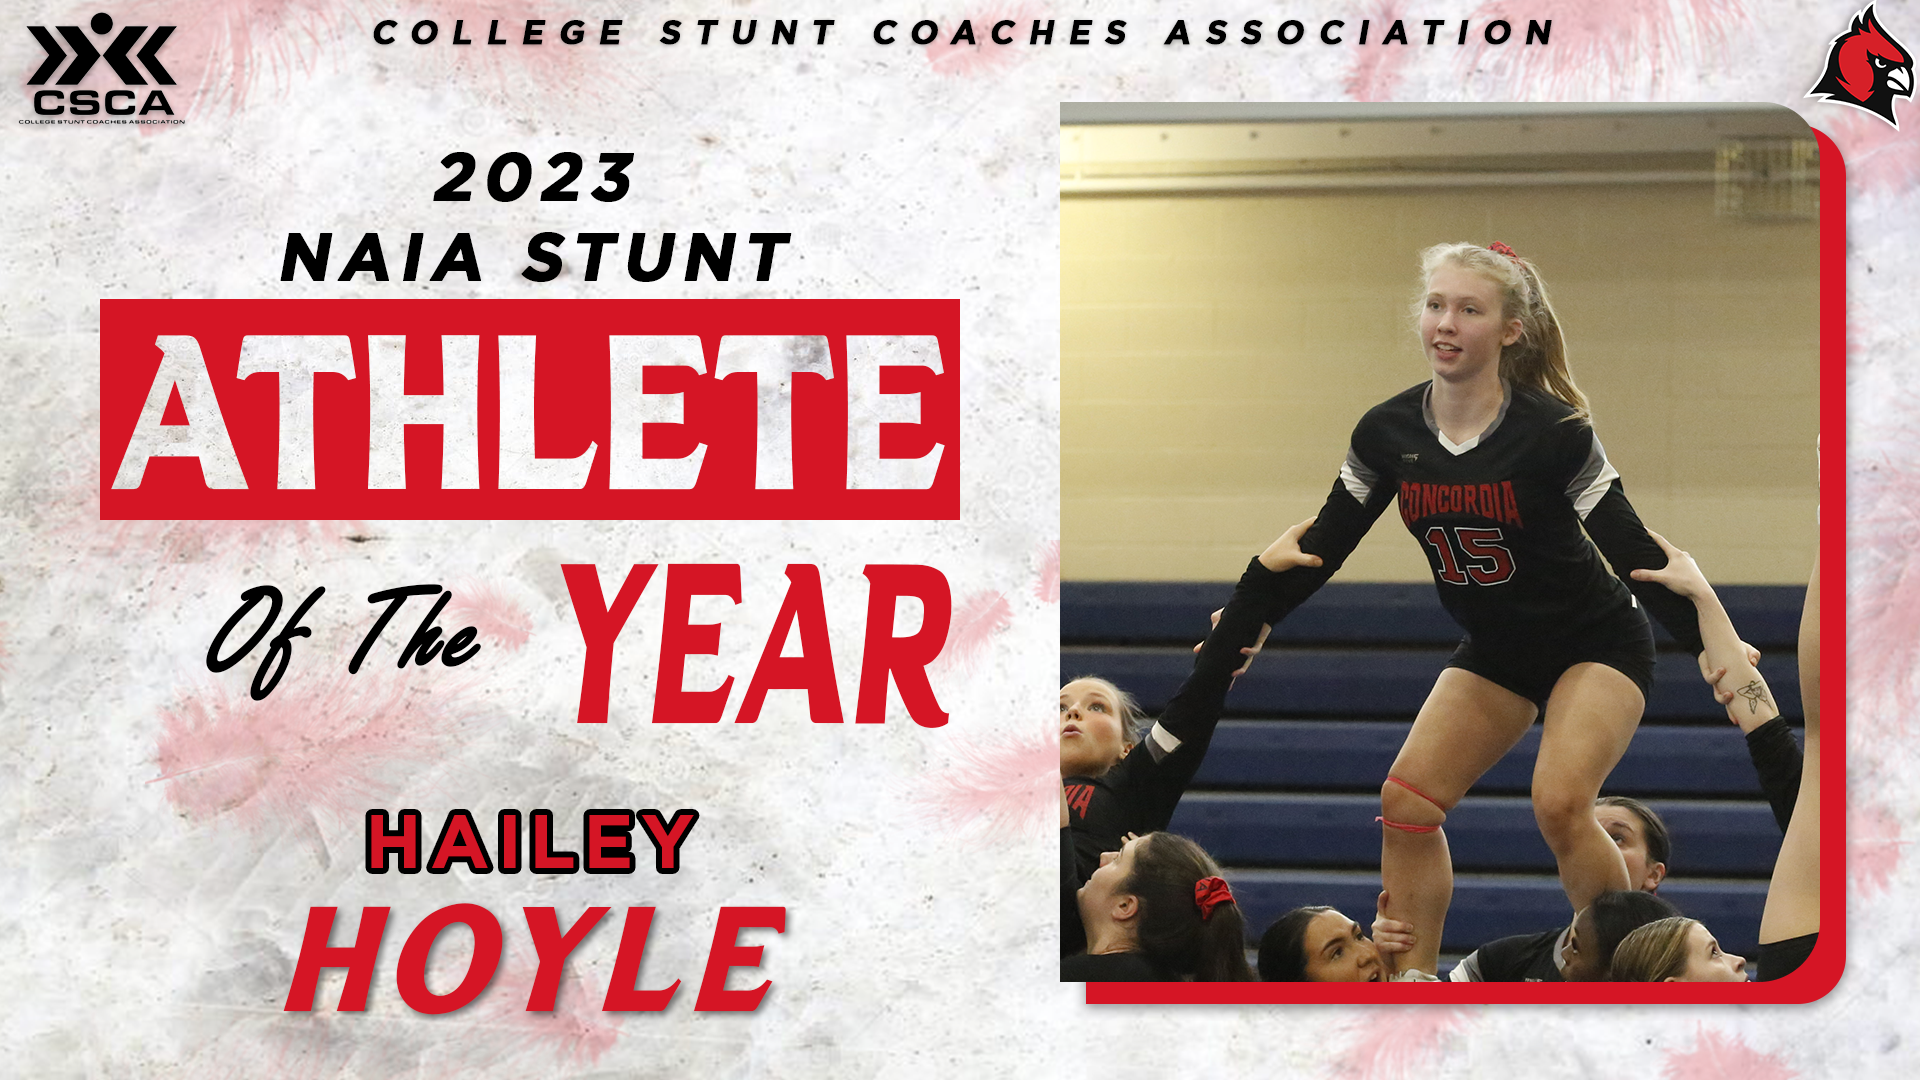 Hailey Hoyle named CSCA NAIA Athlete of the Year; Savana Ruffner earns All-American Honorable Mention